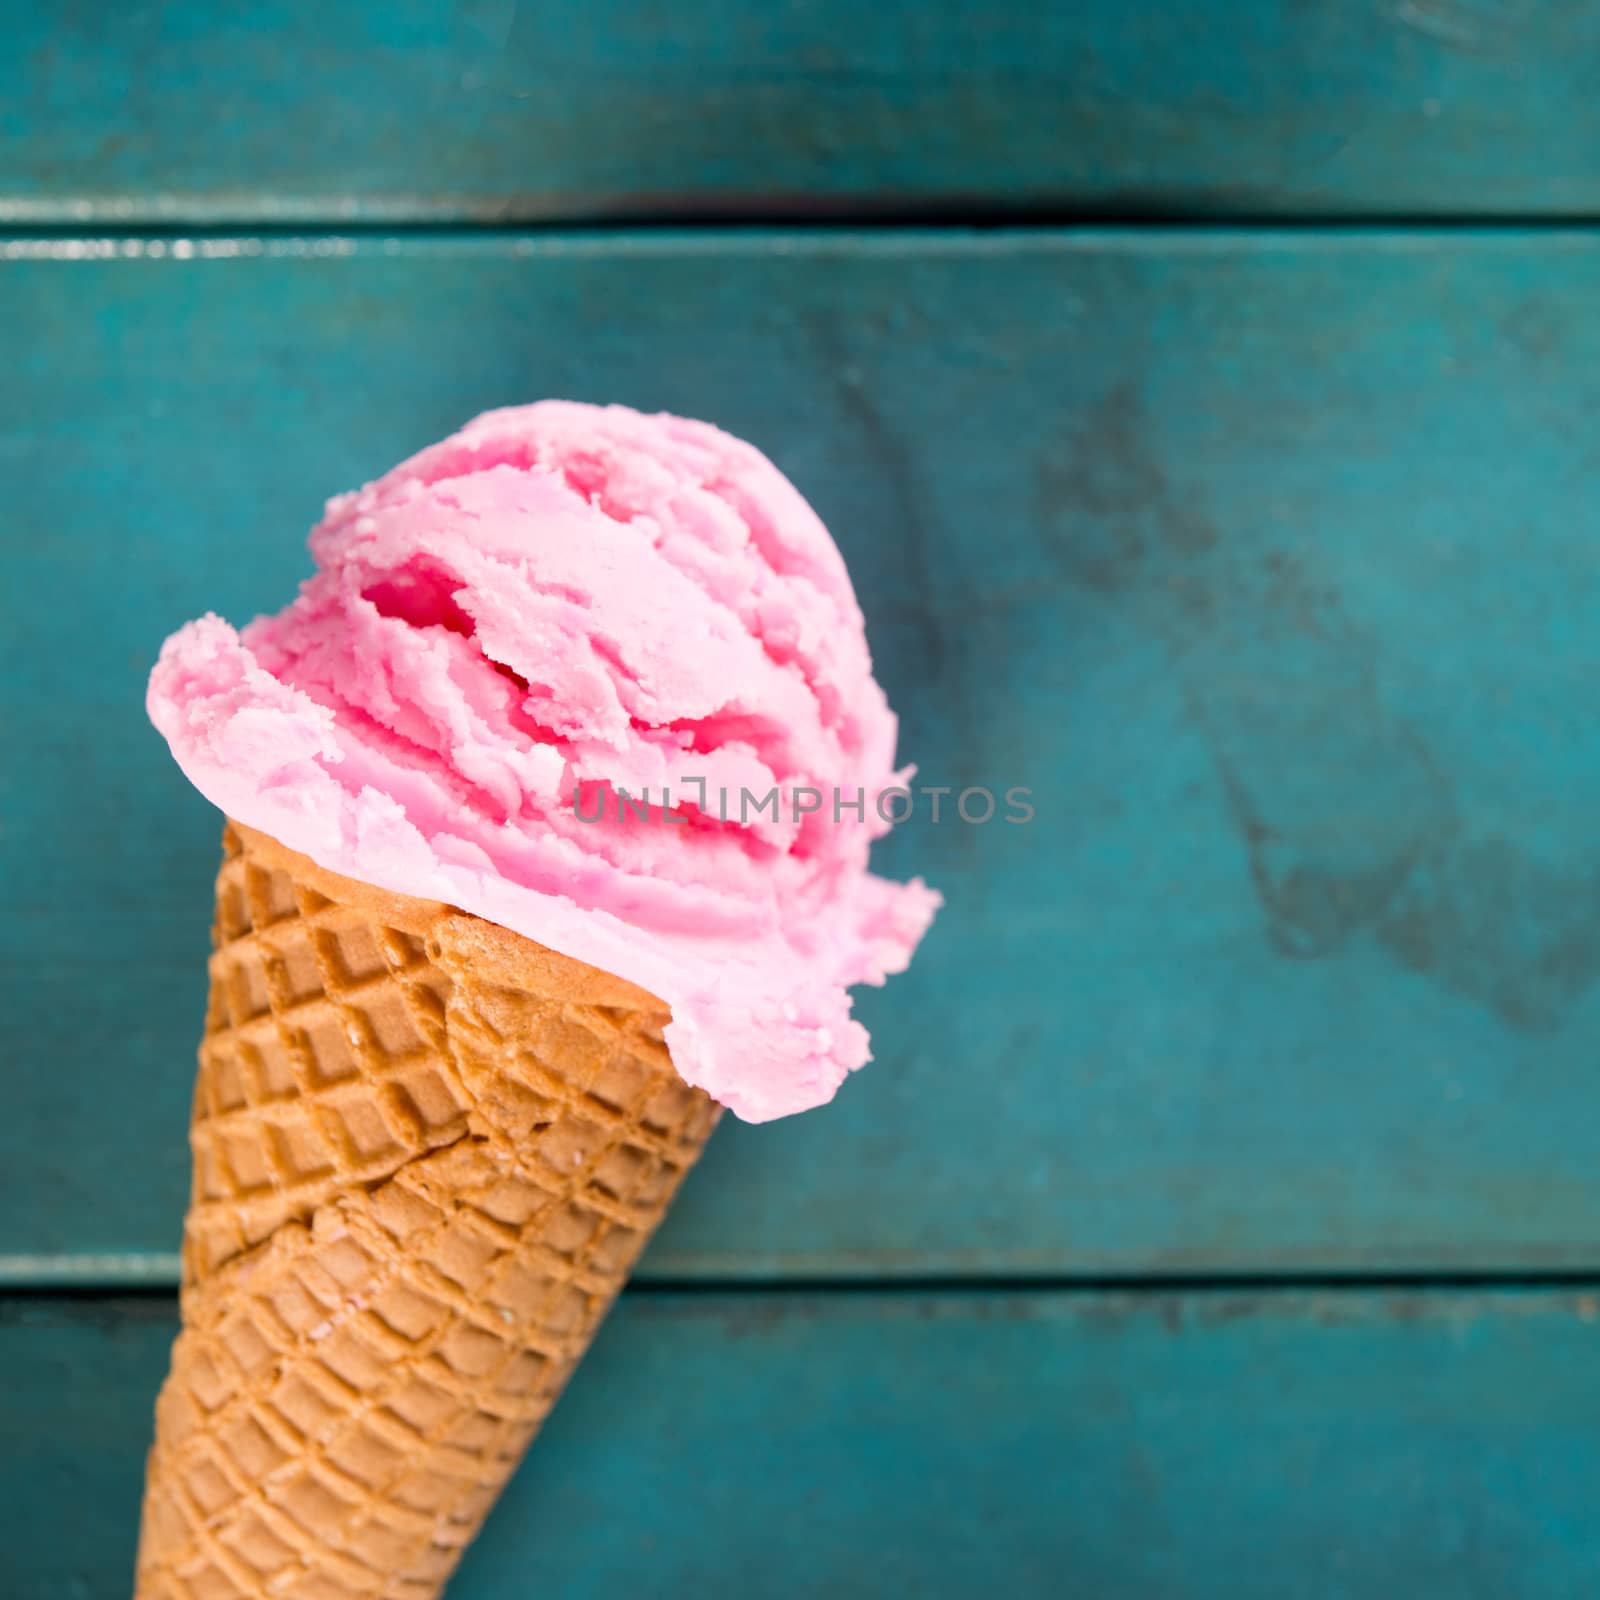 Strawberry ice cream in blue close up by szefei